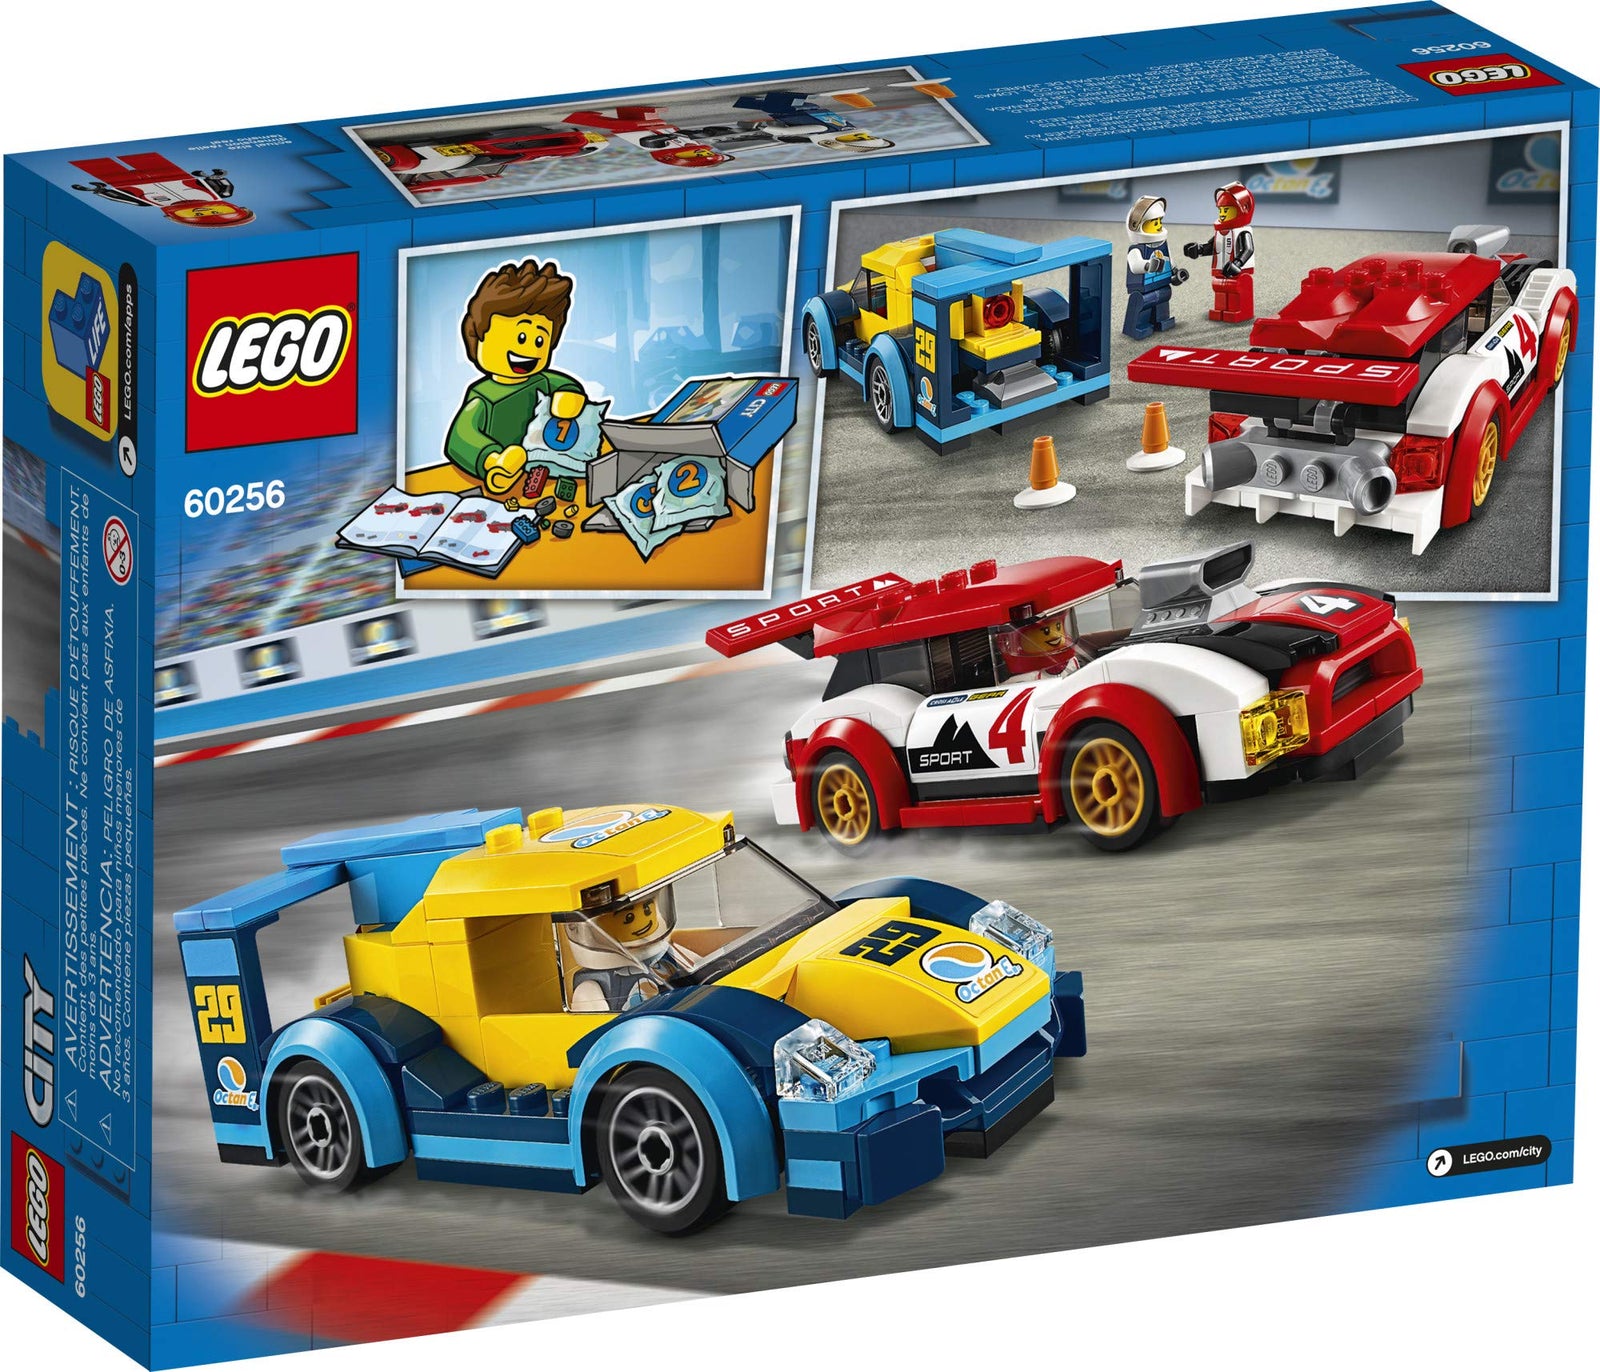 LEGO City Racing Cars 60256 Fun, Buildable Toy for Kids (190 Pieces)